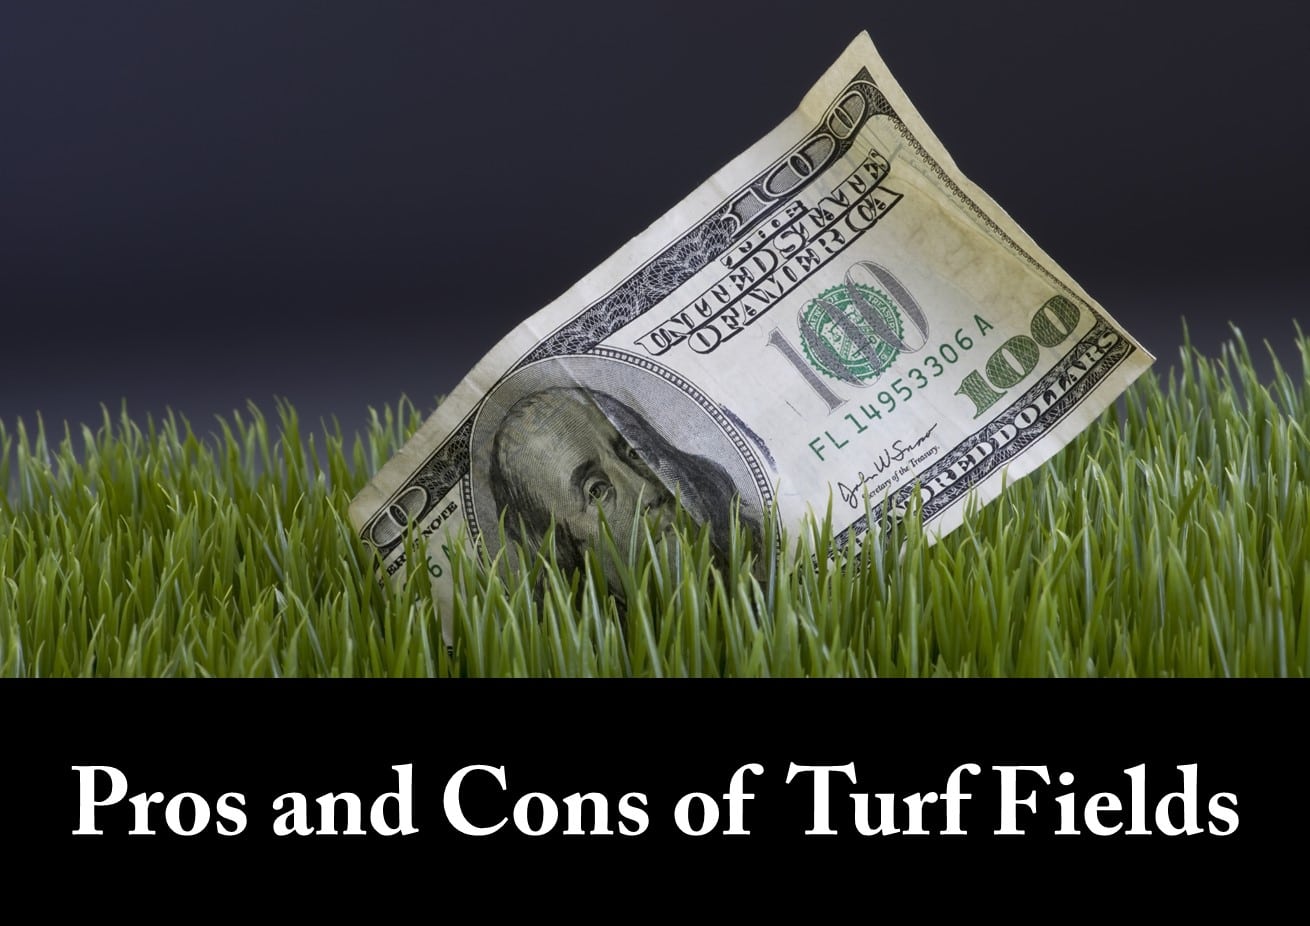 Pros and Cons of Turf Fields